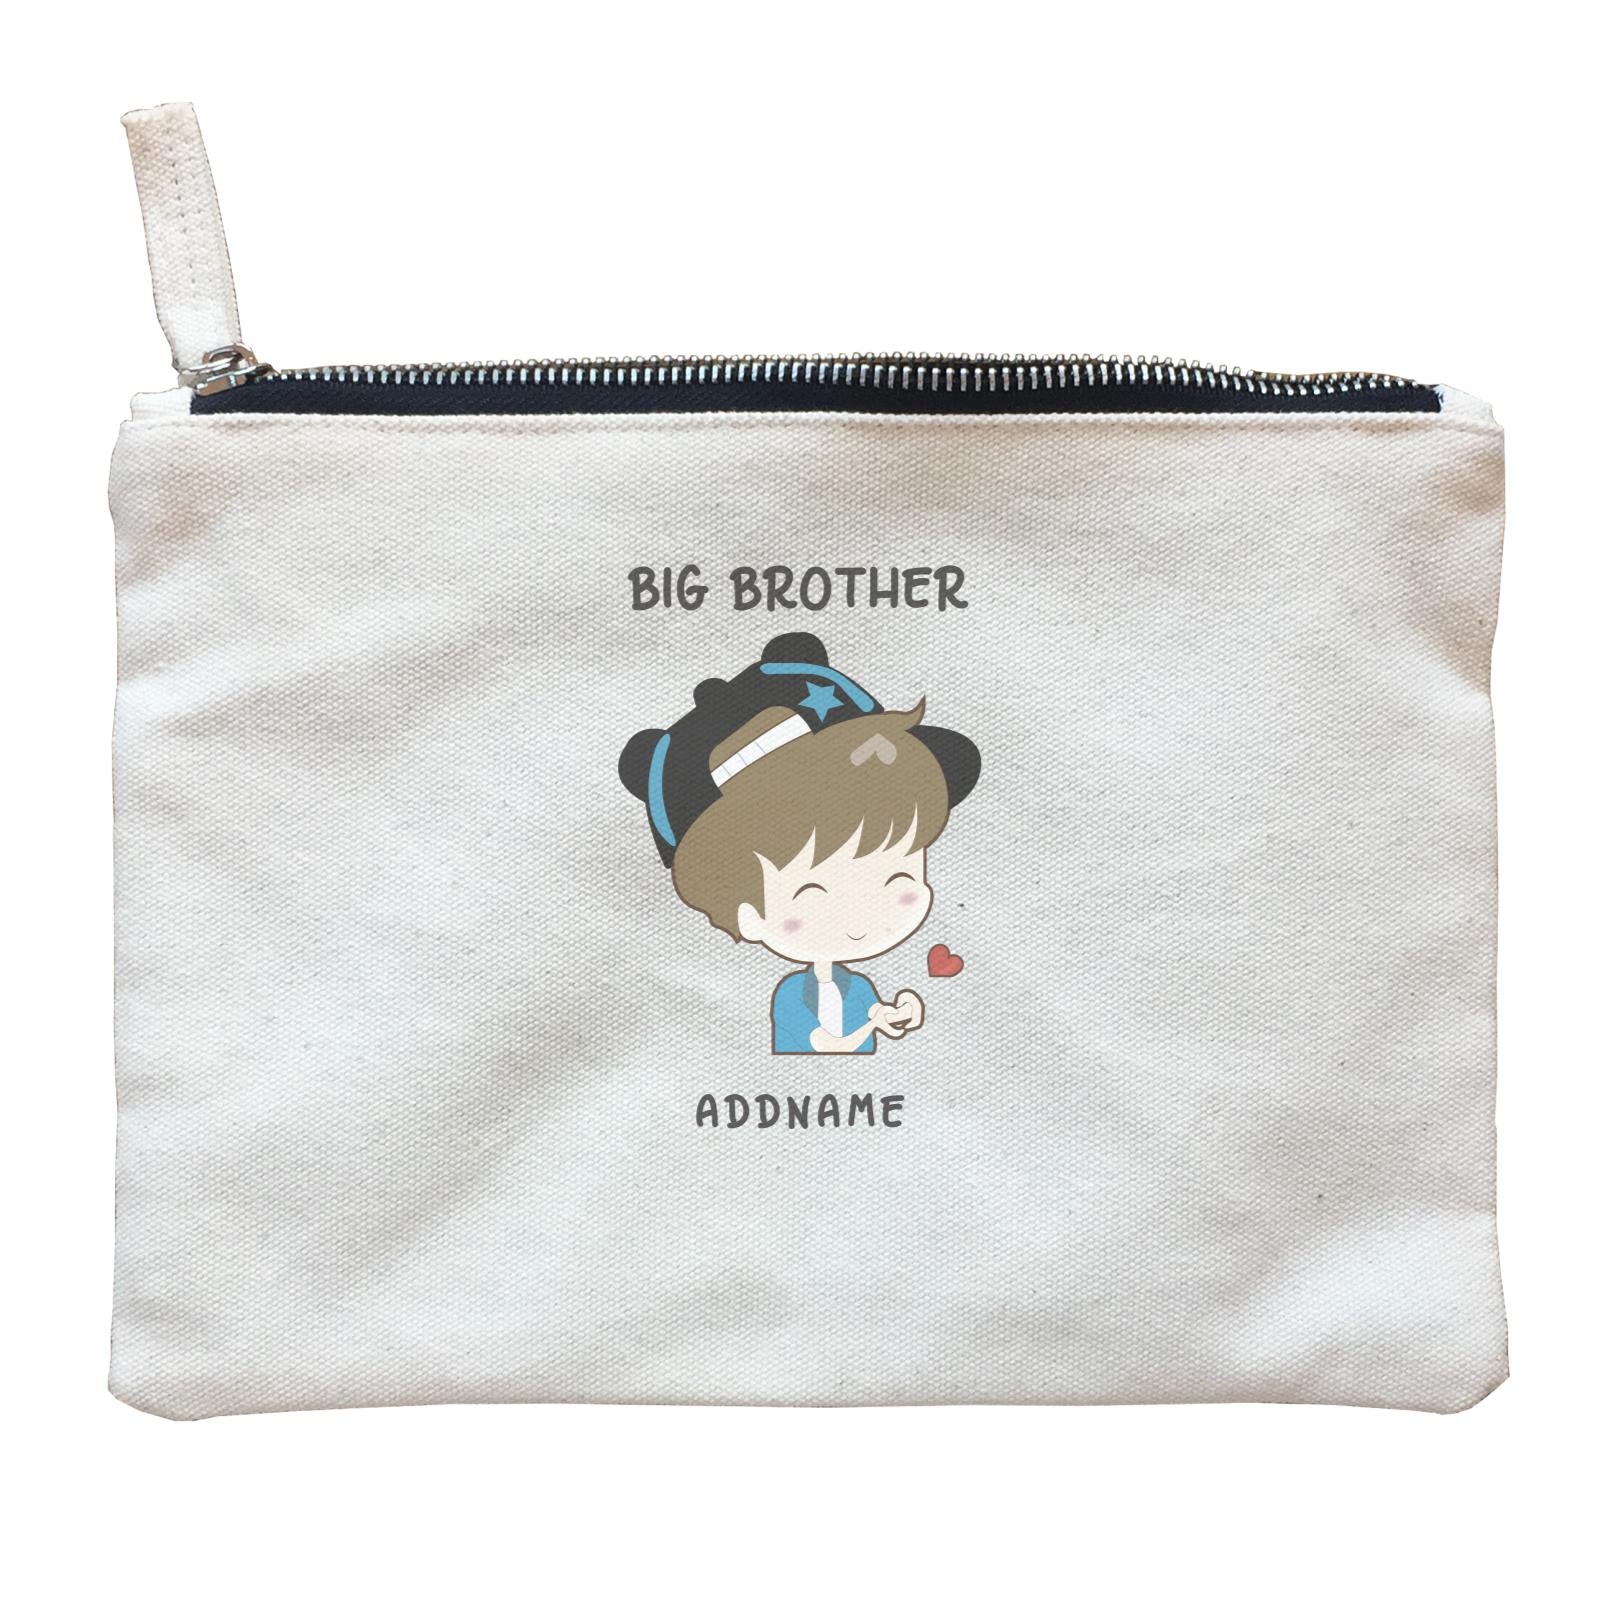 My Lovely Family Series Big Brotther Addname Zipper Pouch